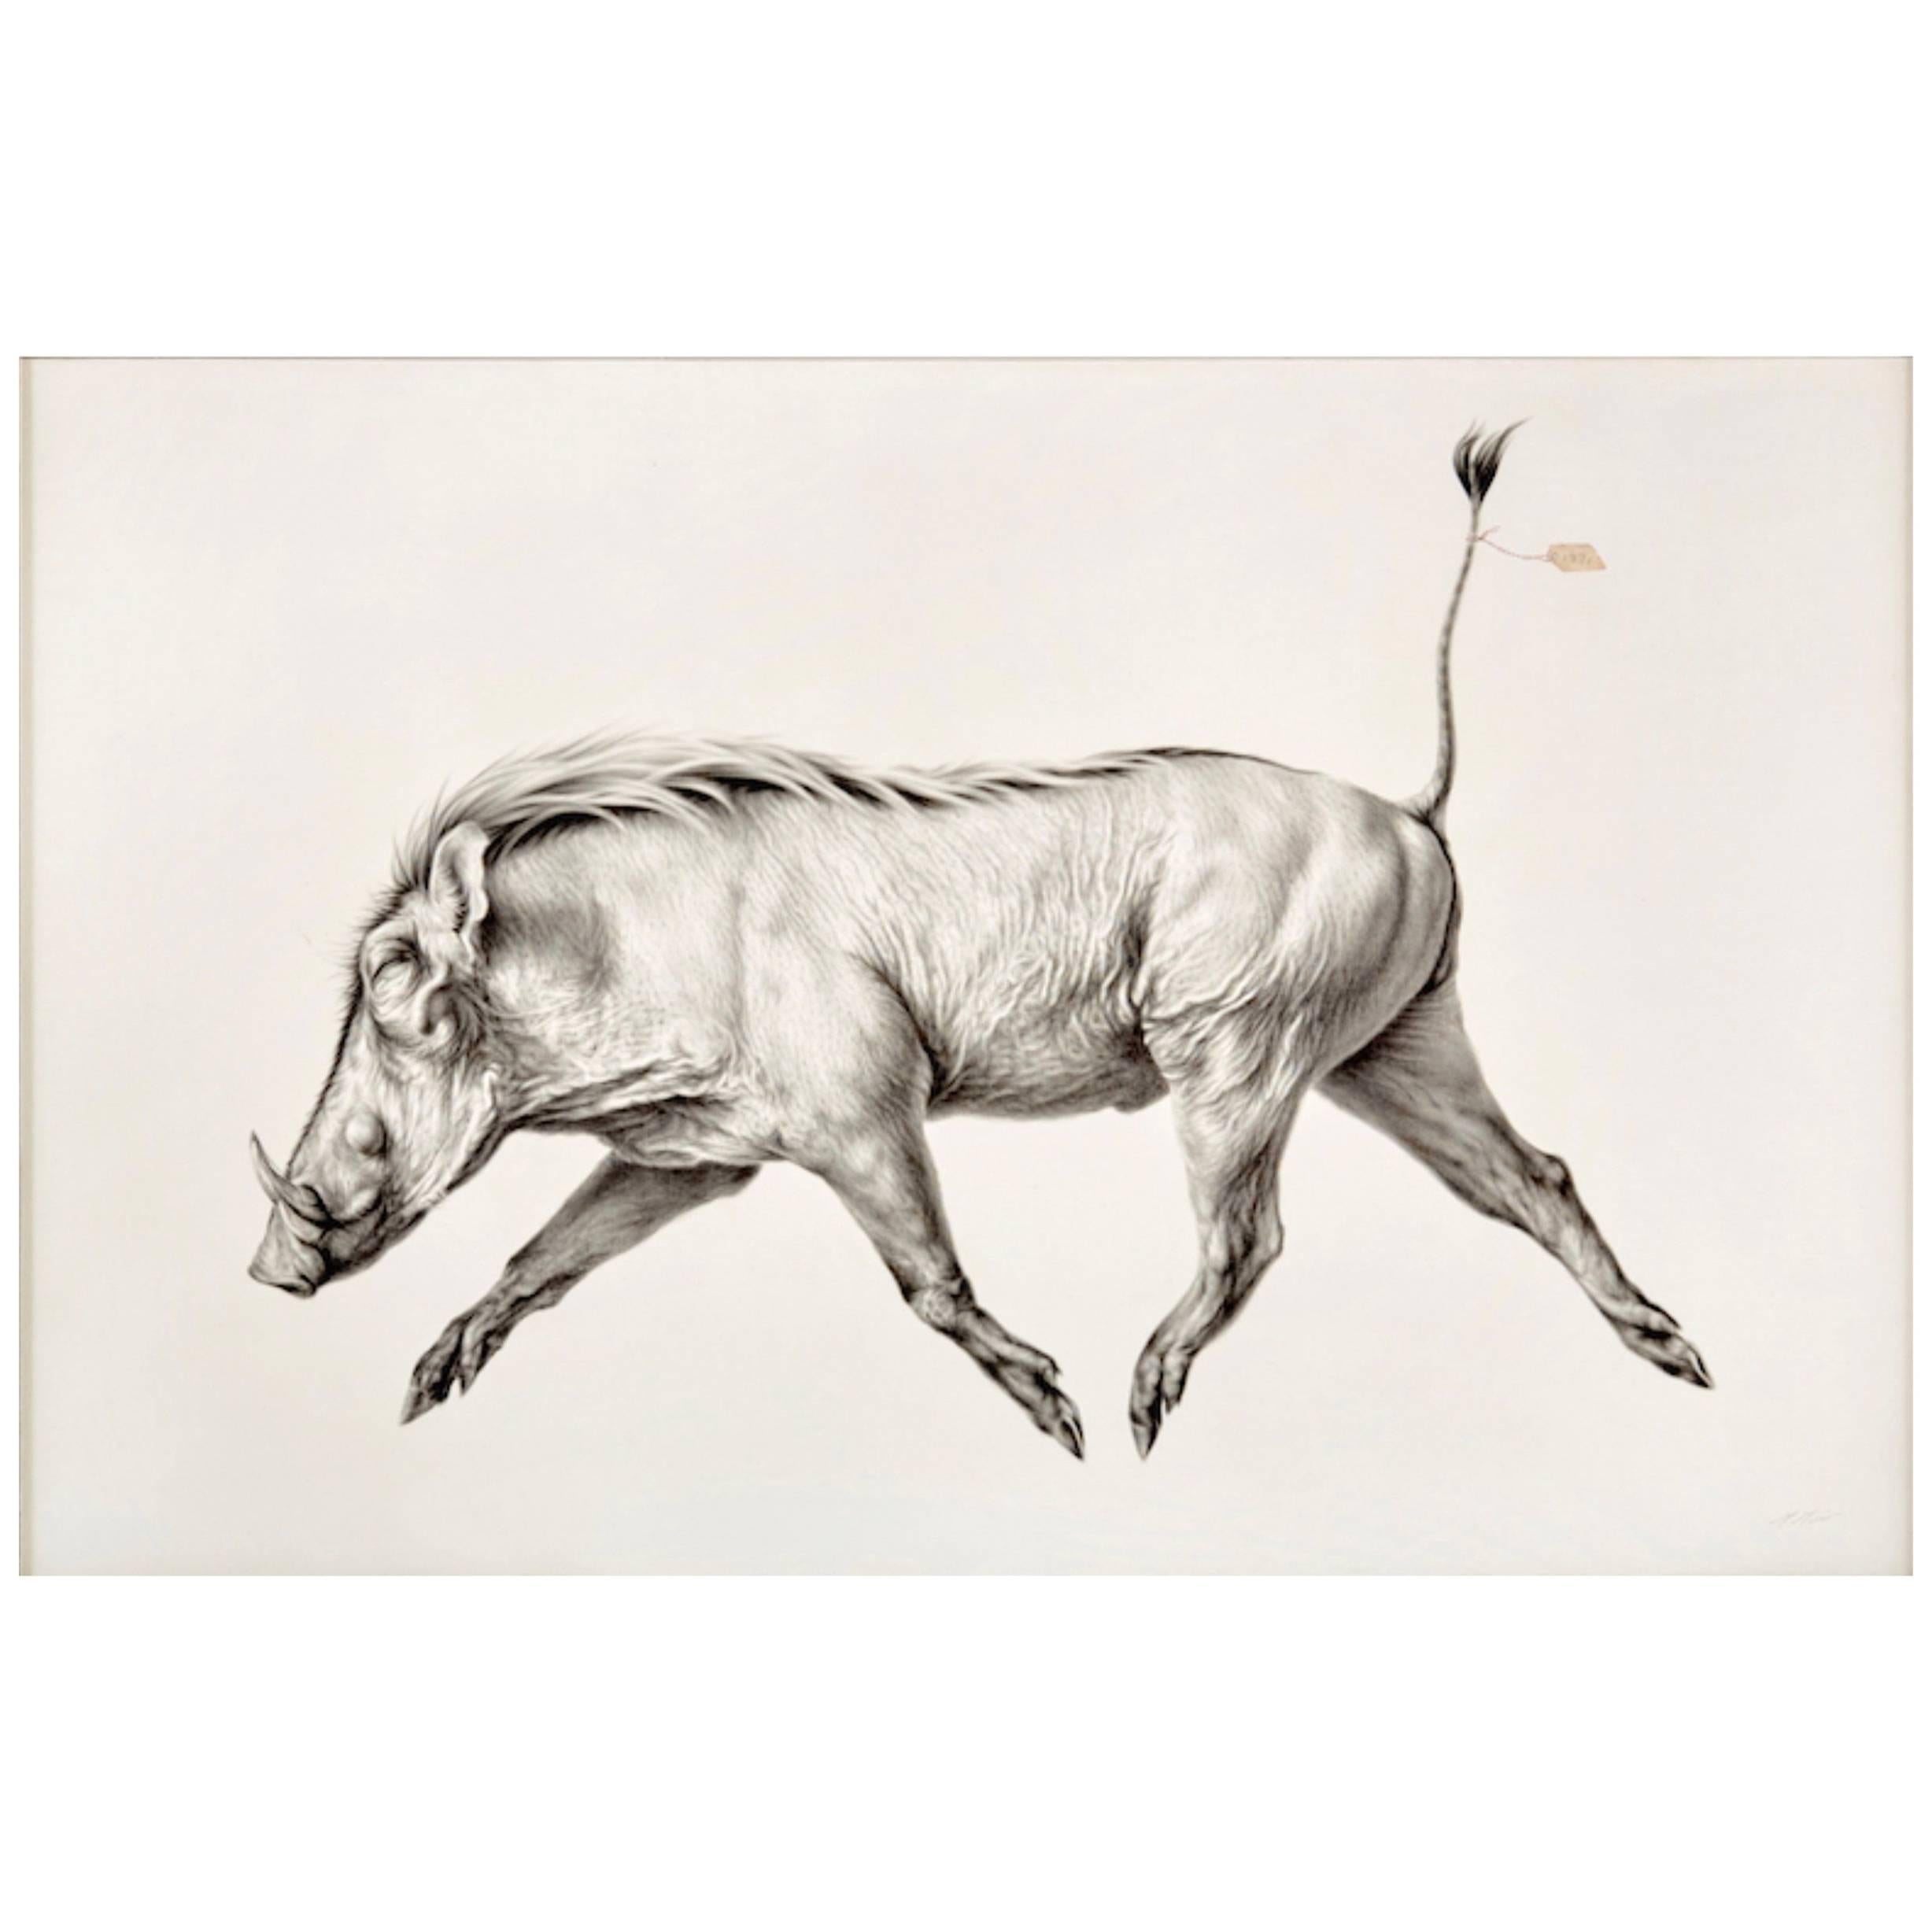 Mali Moir Hypotype - Cape Warthog Charcoal on Cotton Canvas - The Red List 201   For Sale